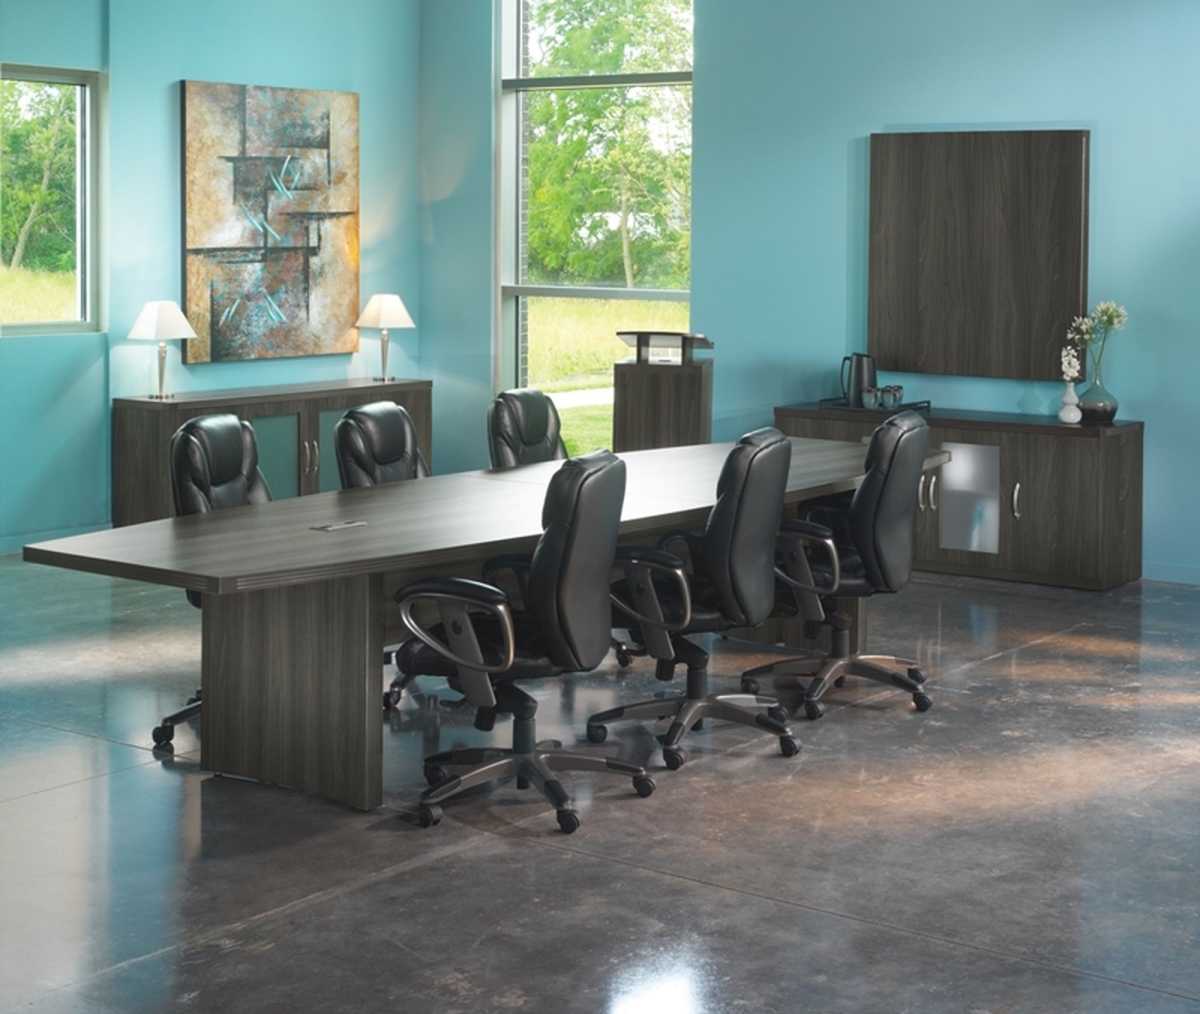 Actb12lgs 12 Ft. Aberdeen Series Conference Table - Laminate Gray Steel - 29.5 X 144 X 48 In.